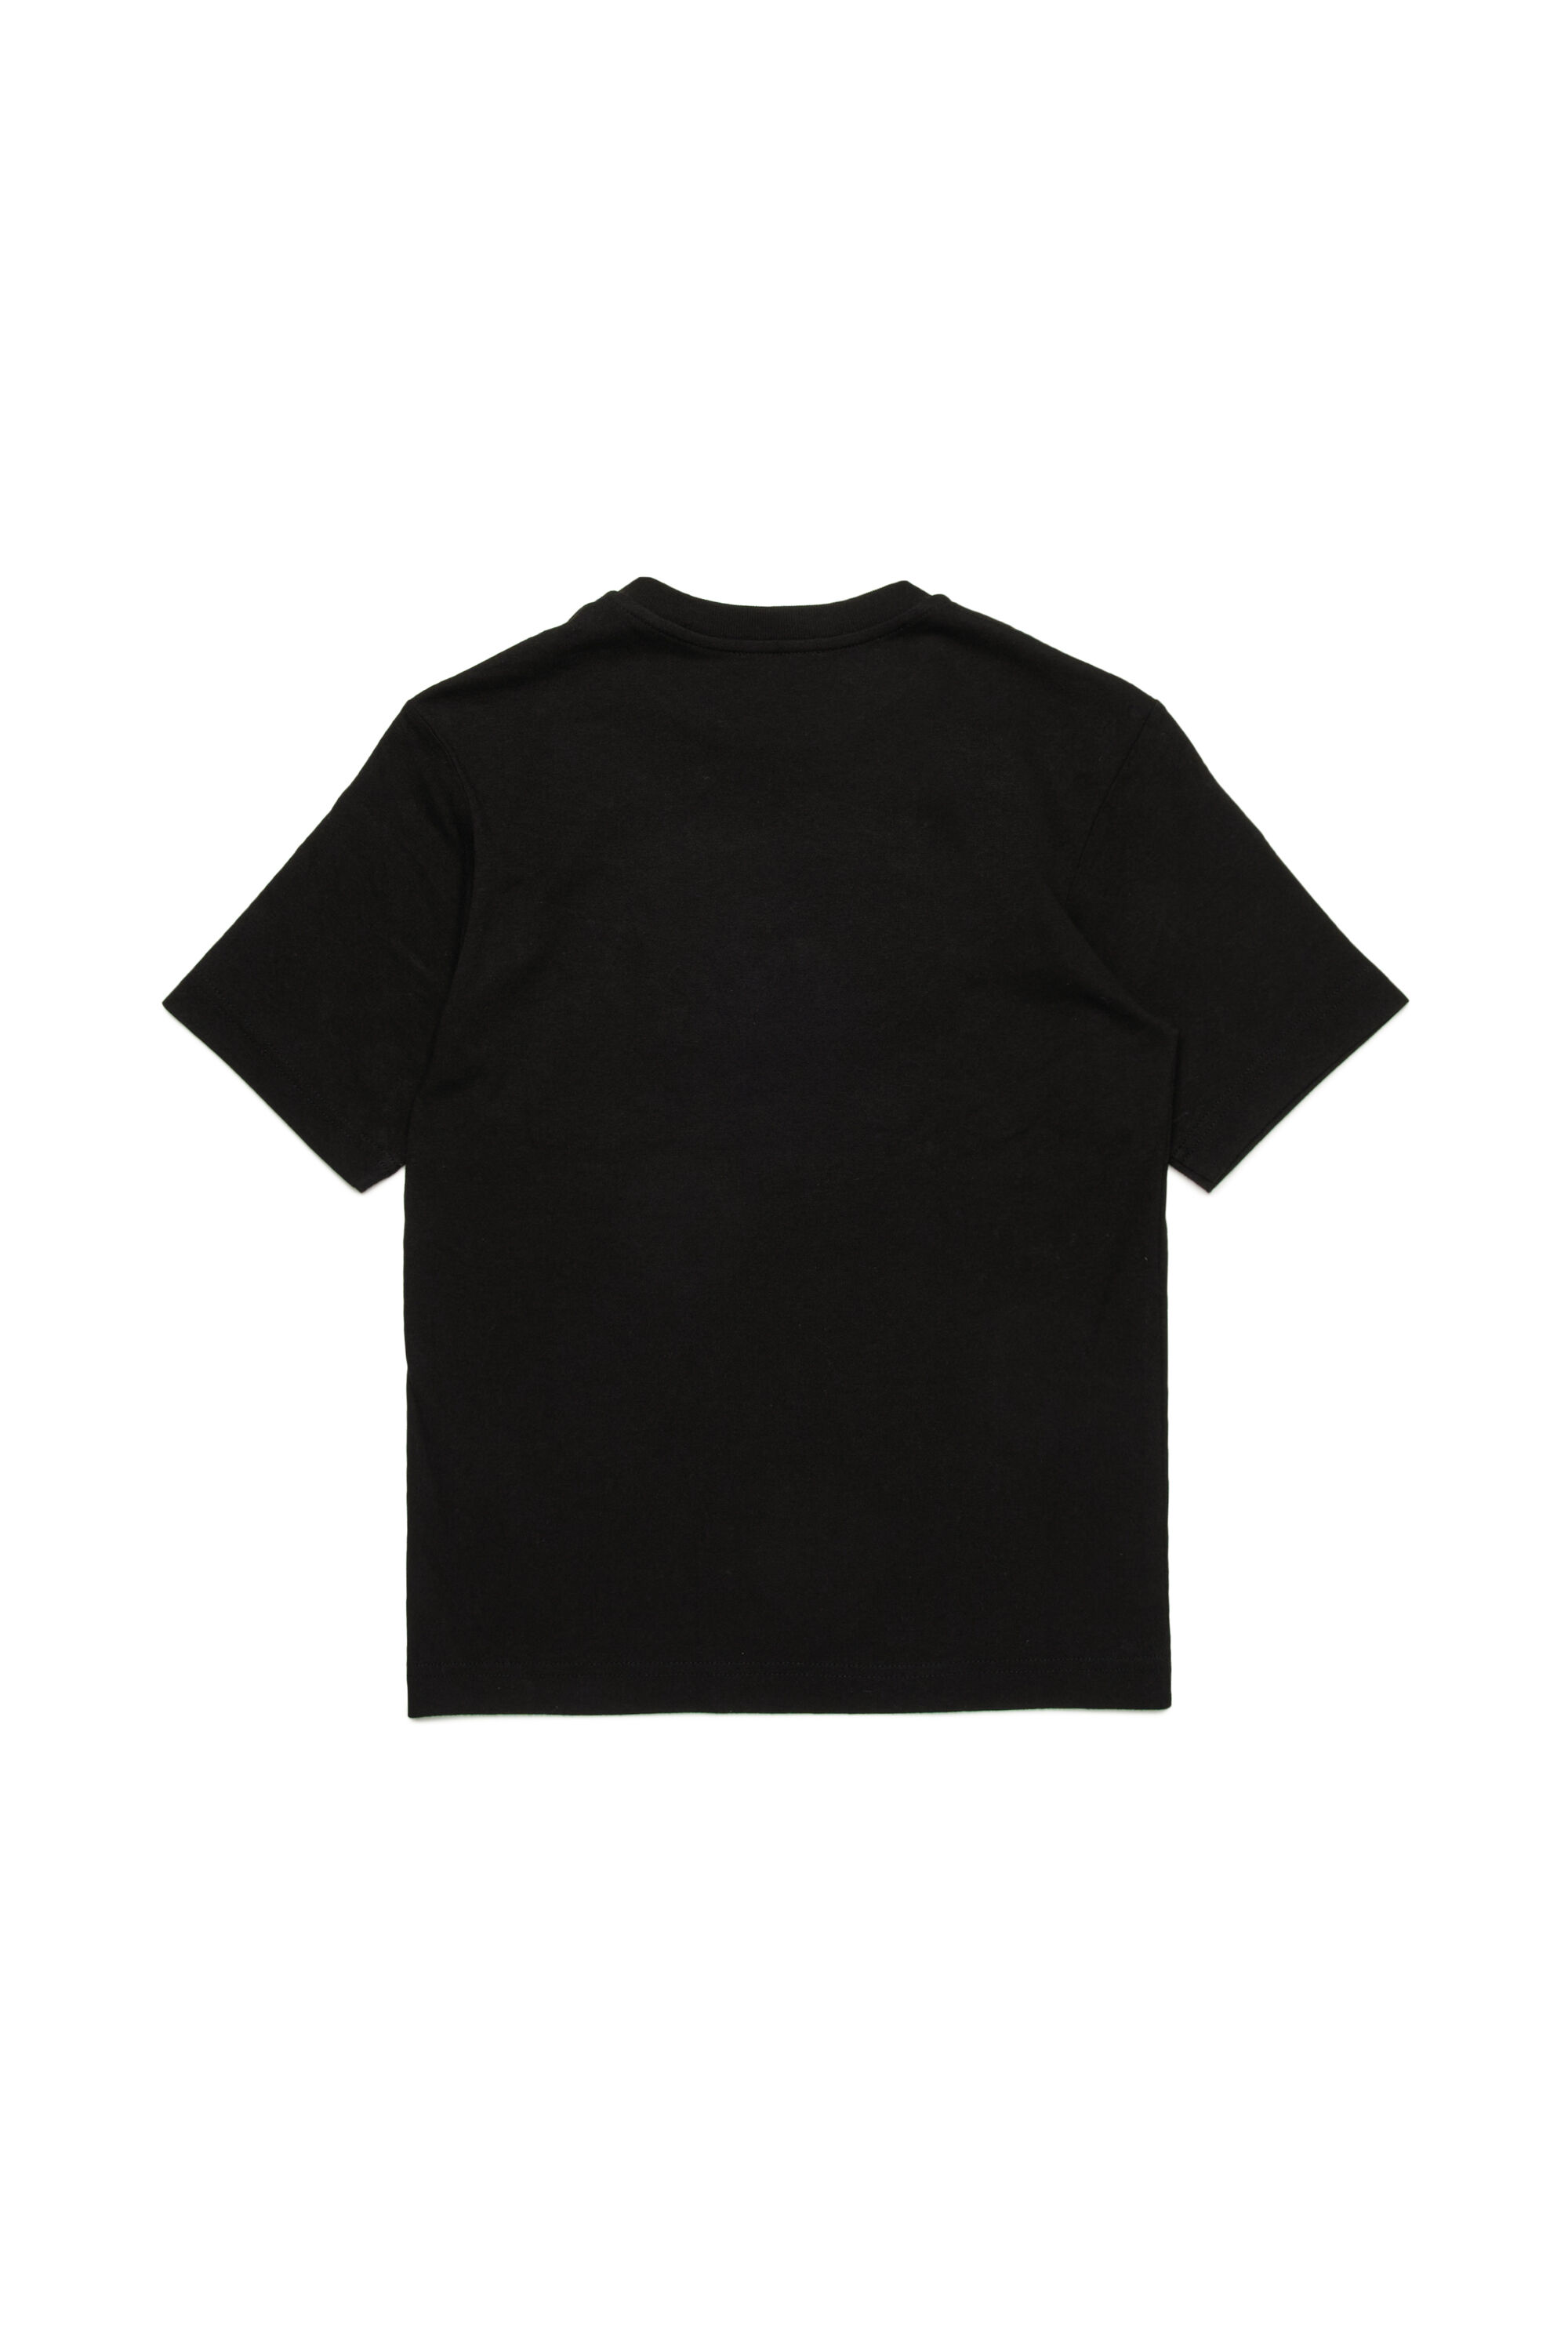 TJUSTBIGOVAL OVER T-shirt with Oval D outline logo｜ブラック 